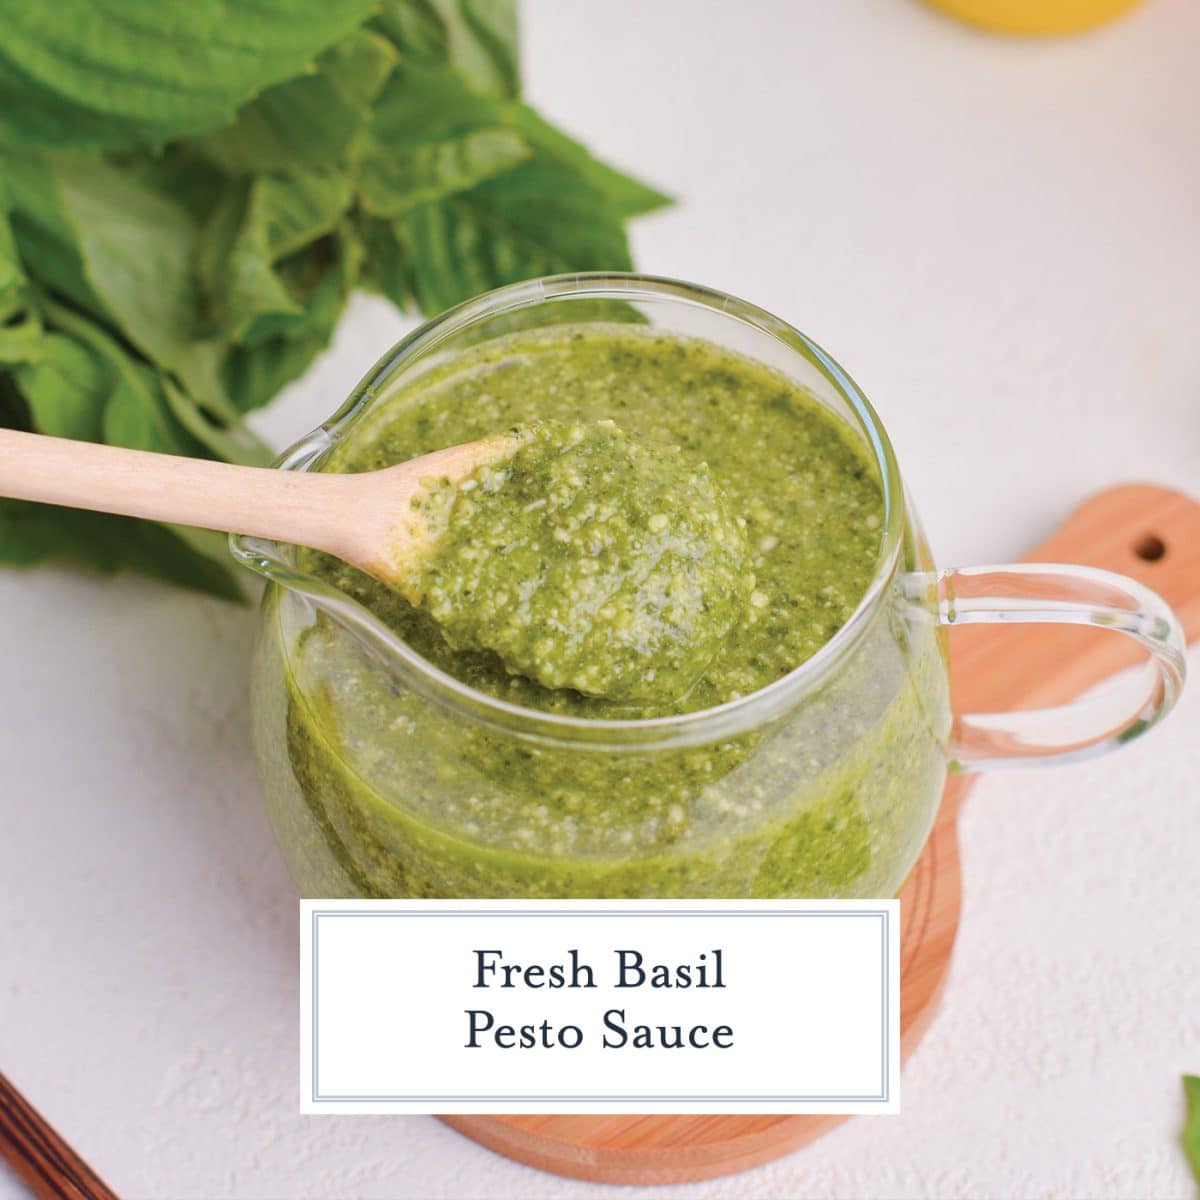 wooden spoon in jar of basil pesto sauce with text overlay for facebook